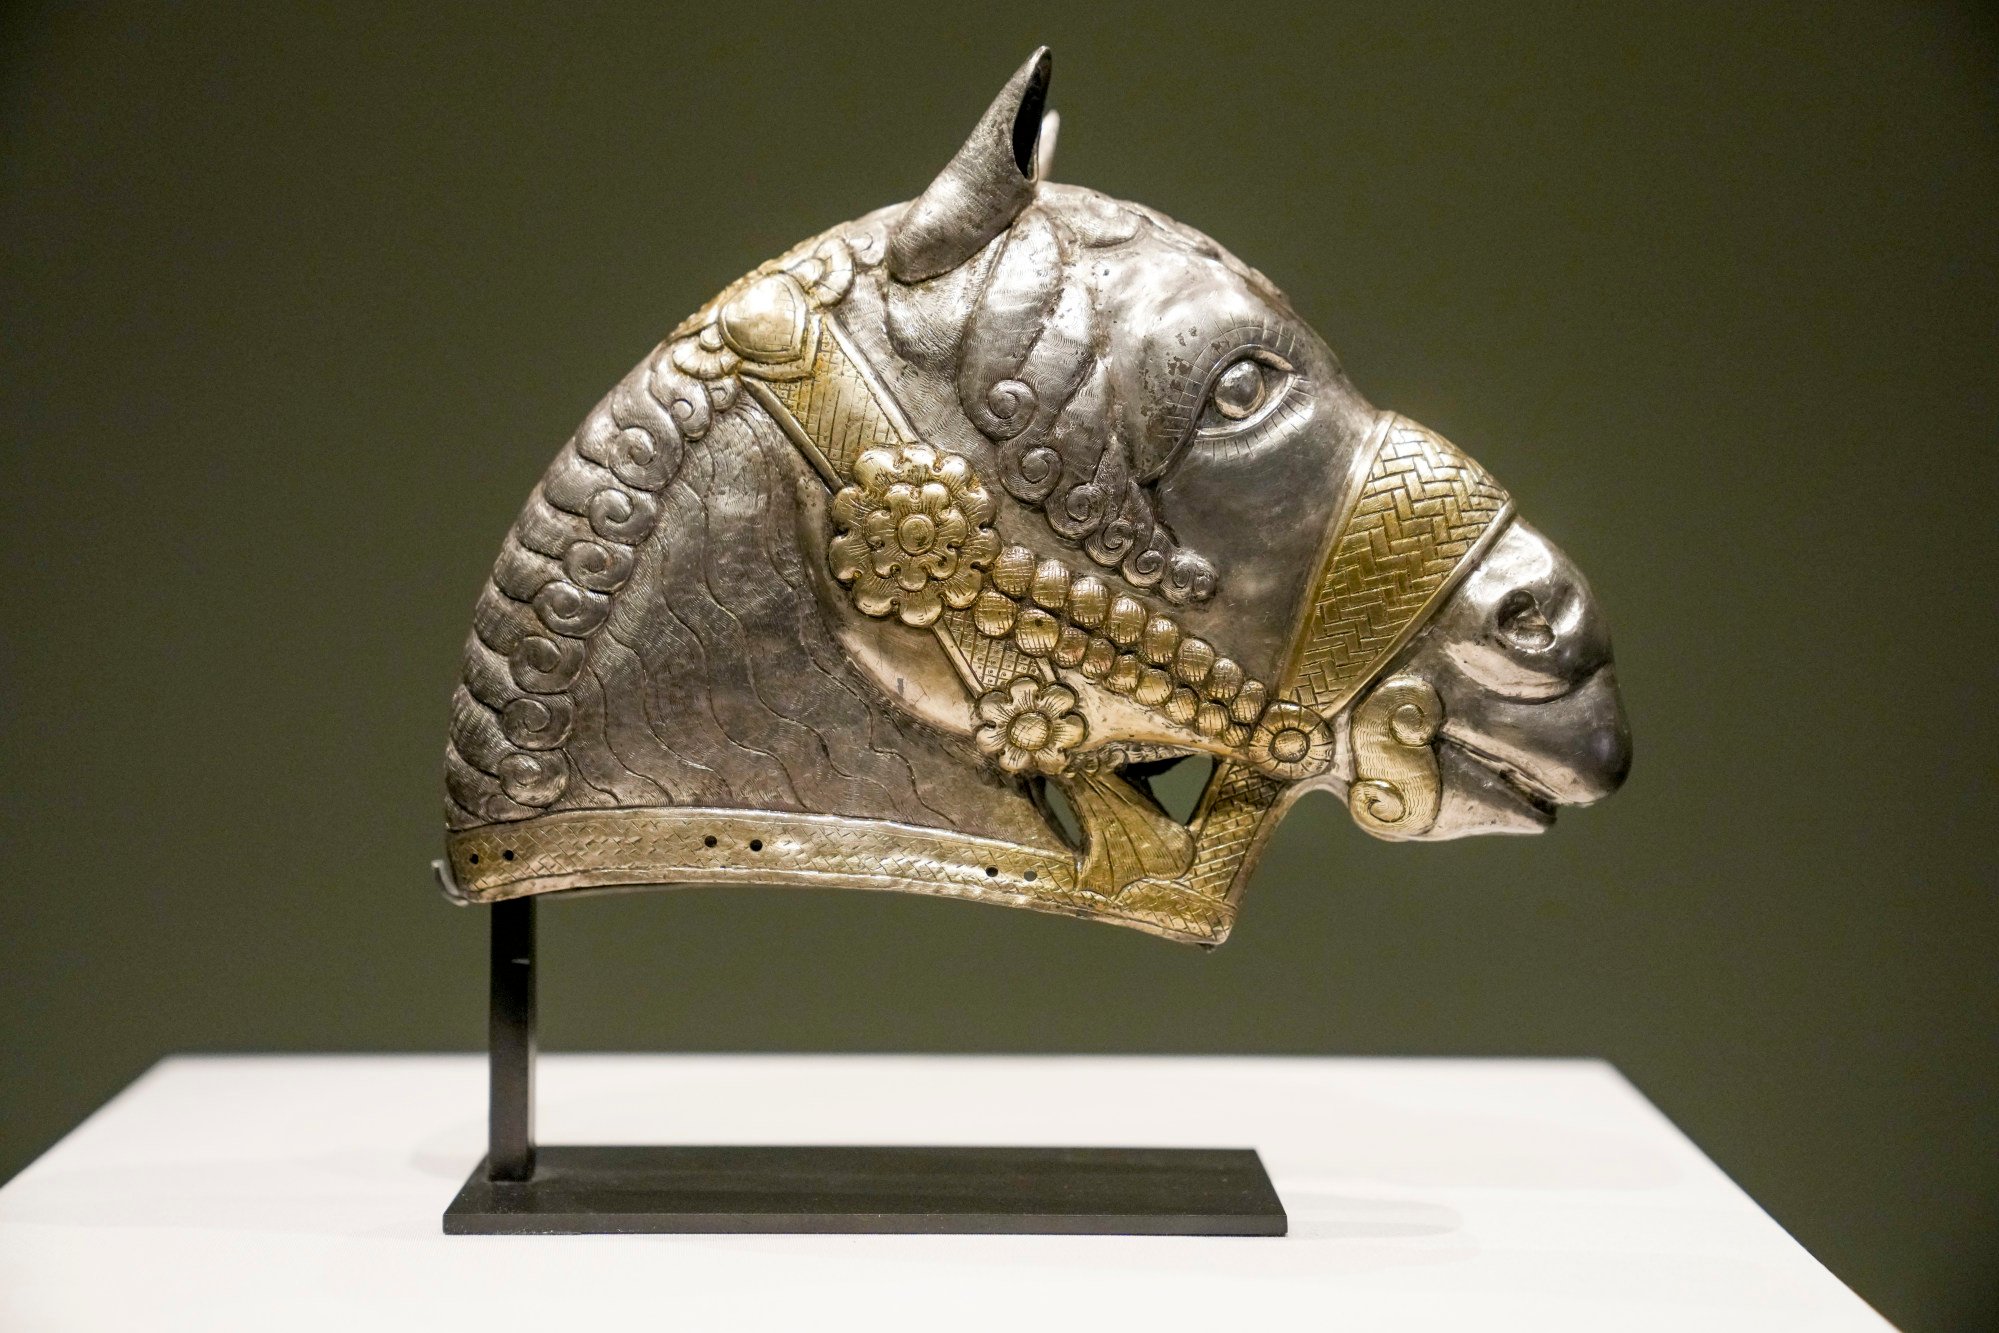 This gilded silver horse head is featured in “Grand Gallop: Art and Culture of the Horse”, the Hong Kong Palace Museum’s special exhibition presented in collaboration with the Louvre in Paris. Photo: Sam Tsang